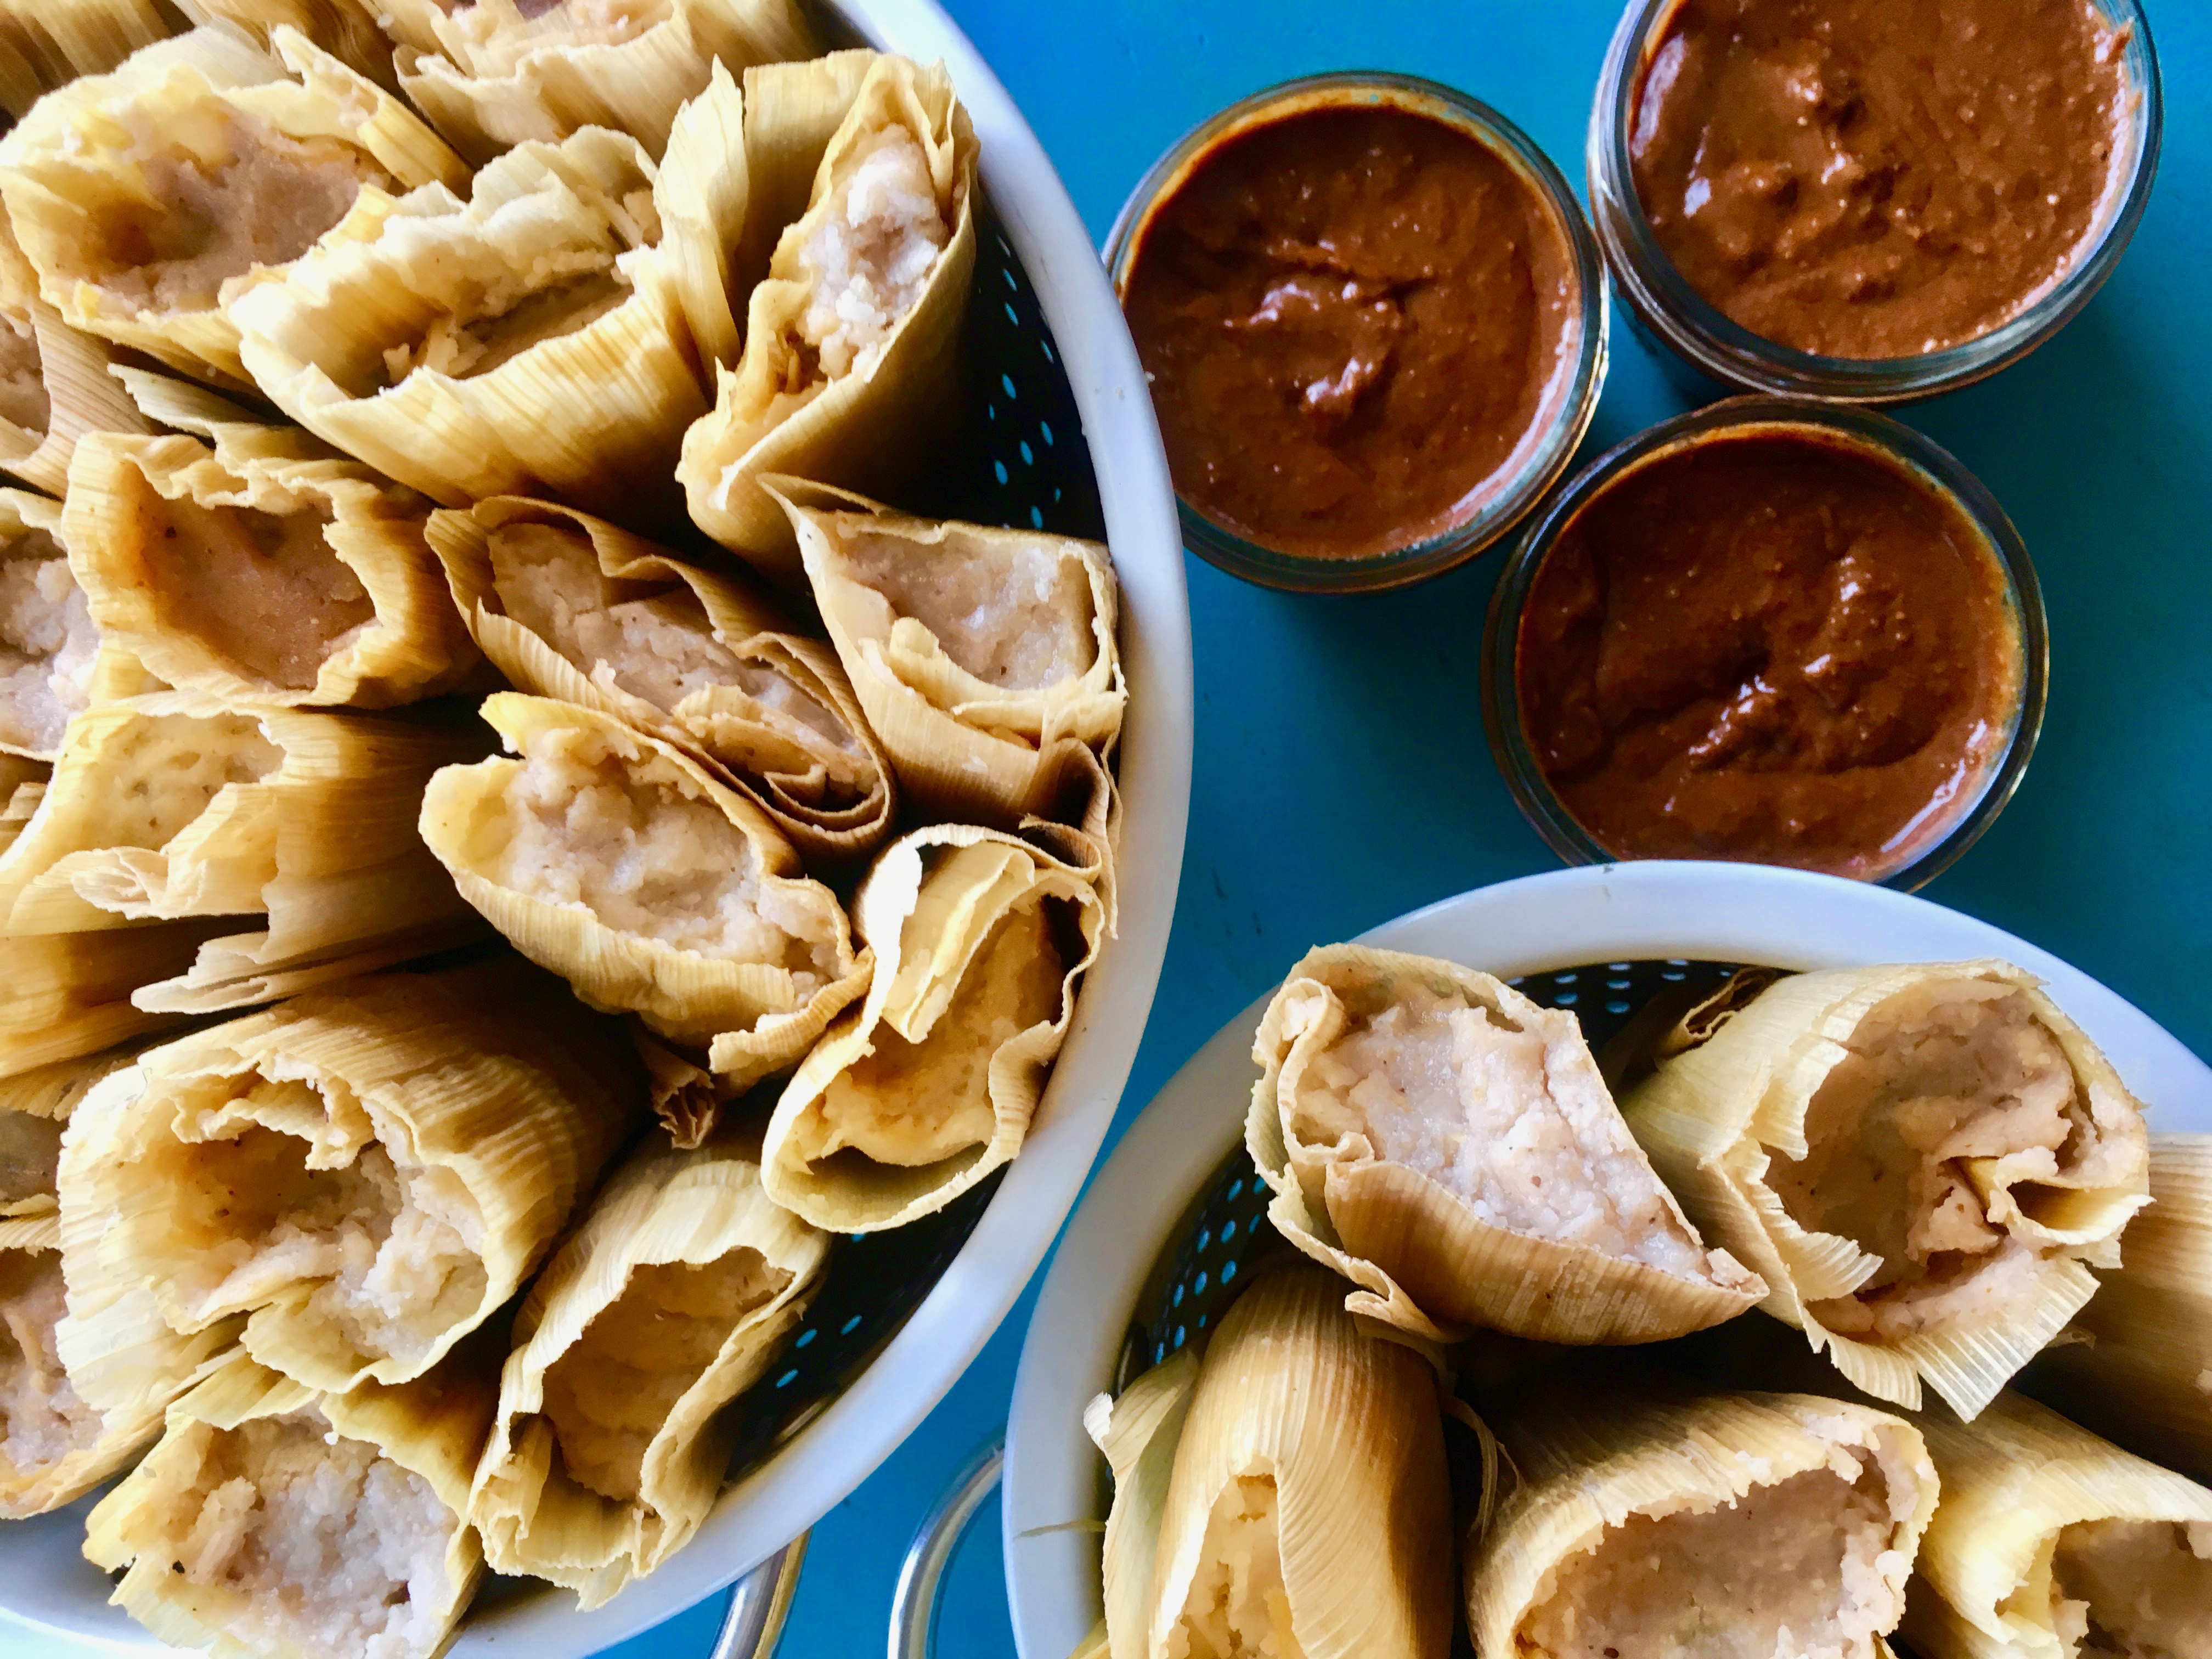 Tamales with varying dipping sauces